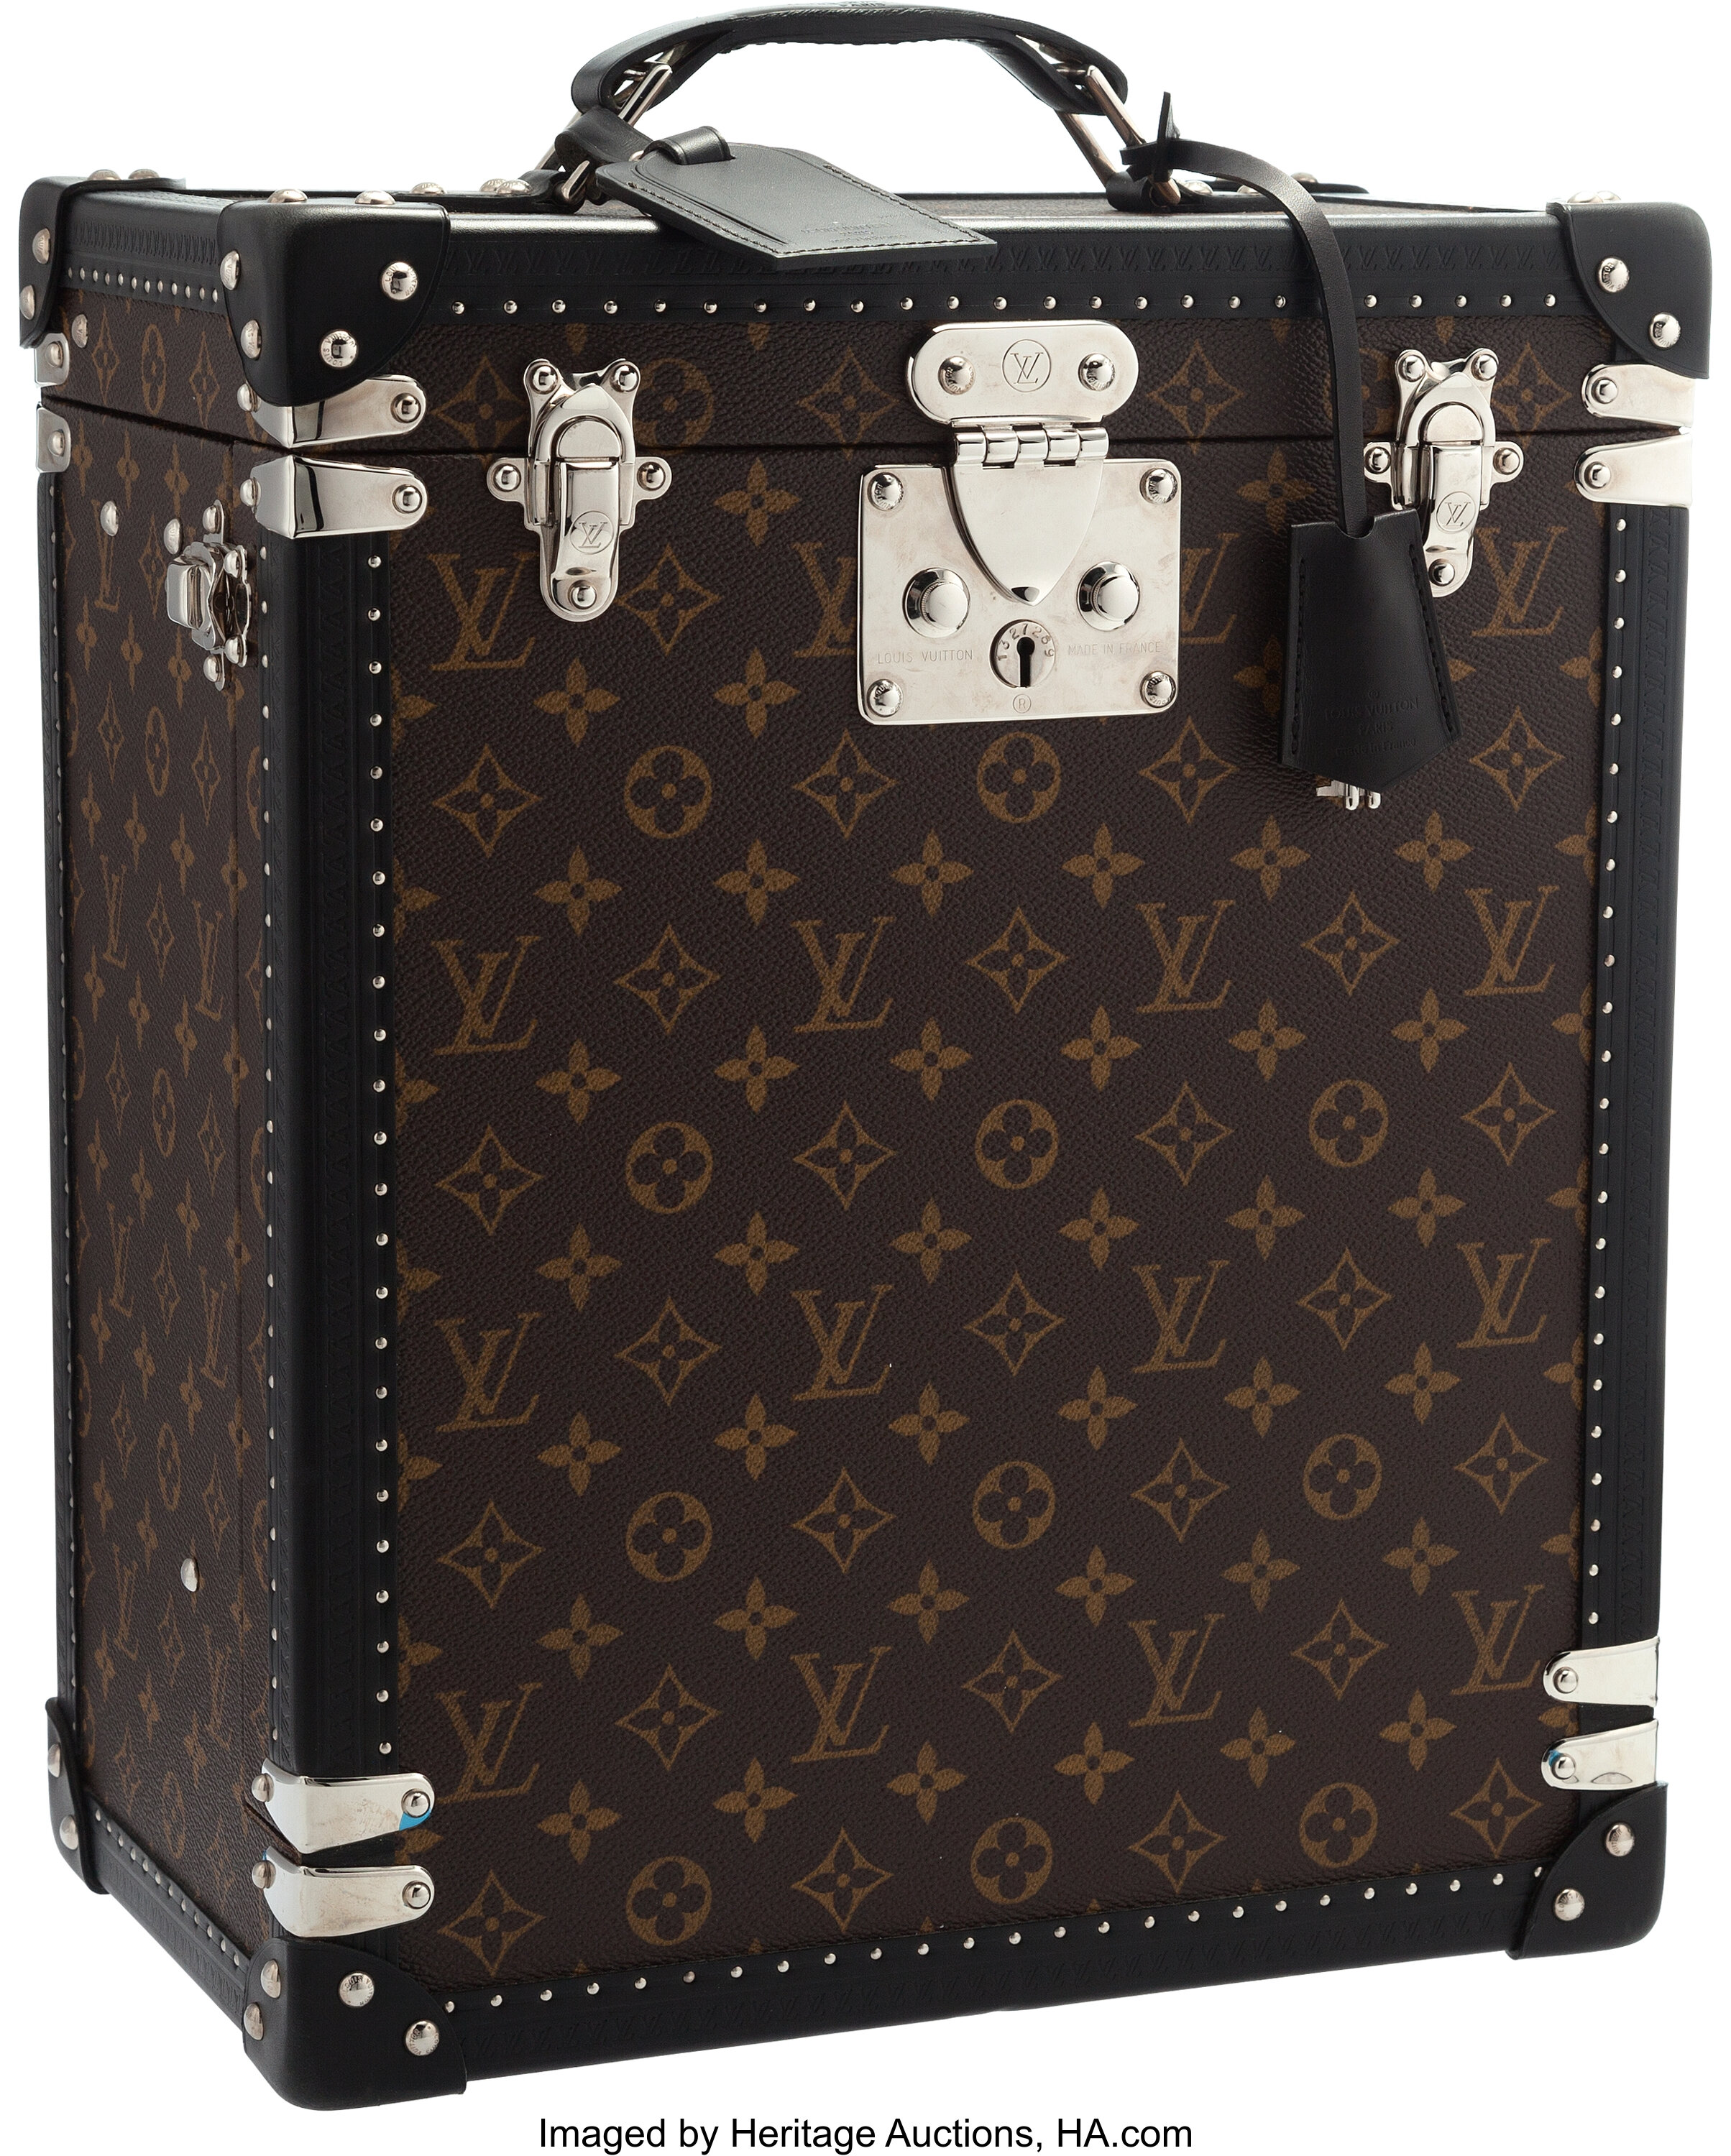 Special Edition Lv Trunk Cases